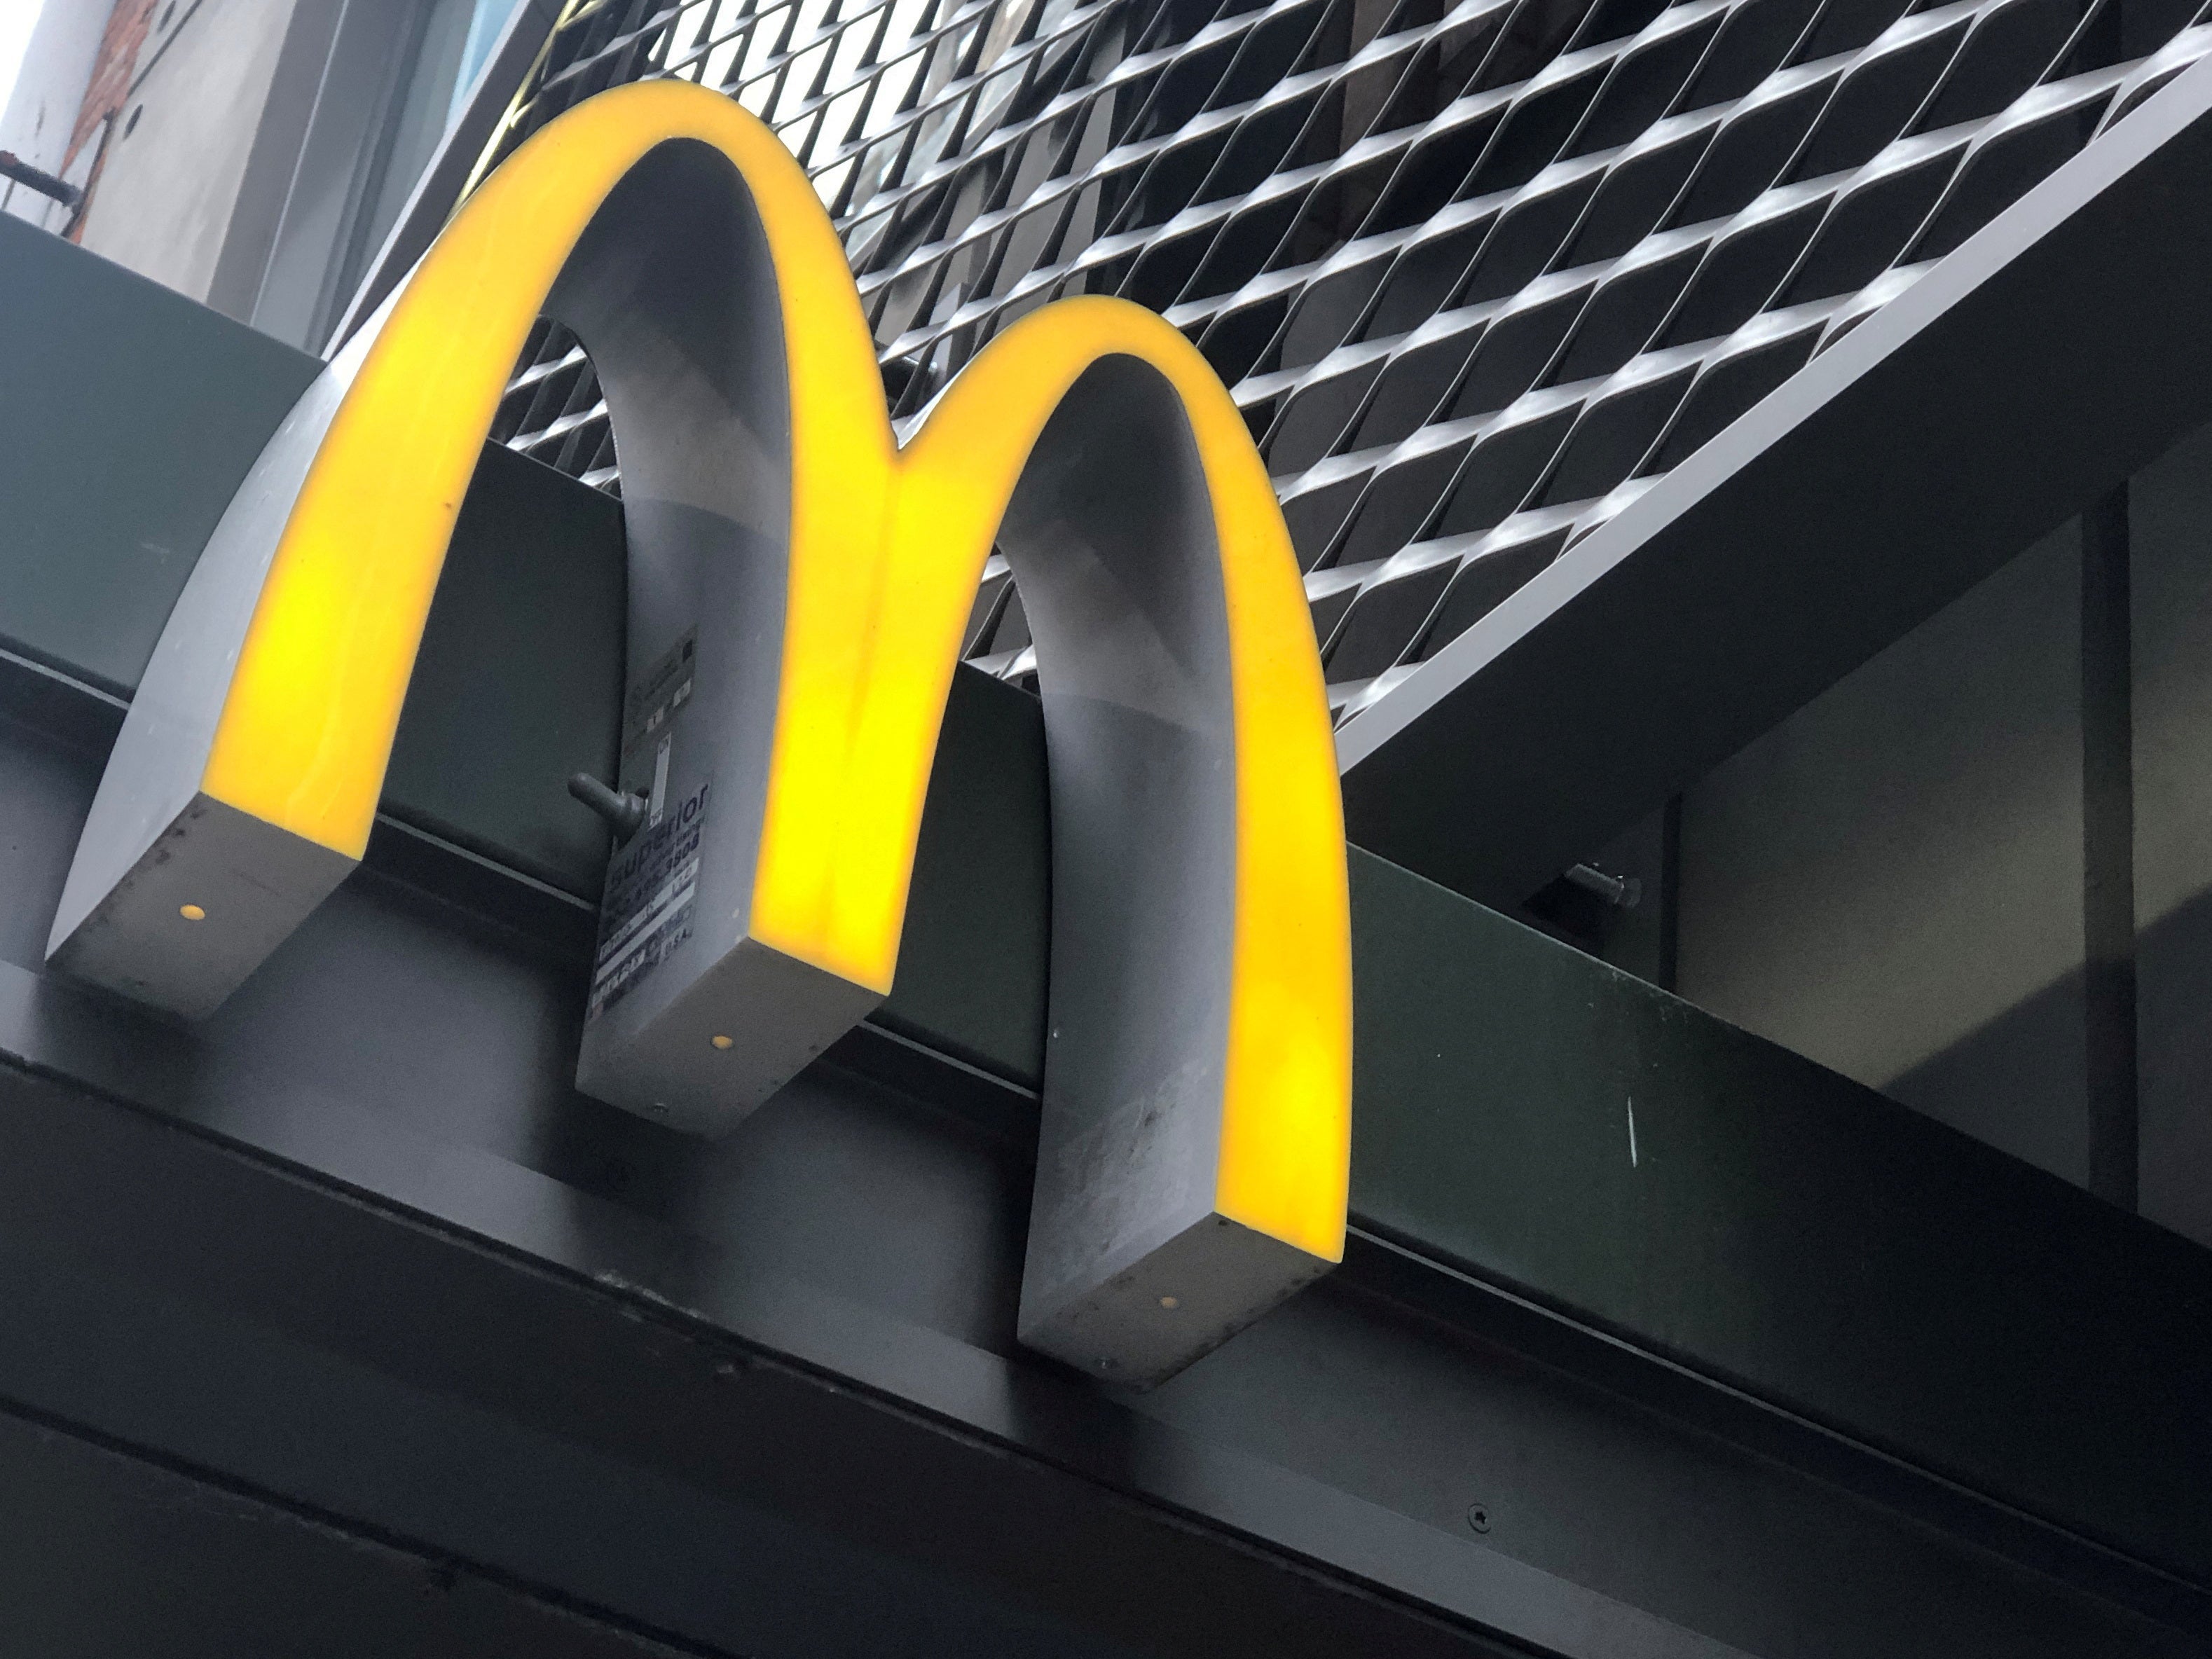 McDonald’s CEO said ‘our hearts remain with the communities and families impacted by the war in the Middle East’